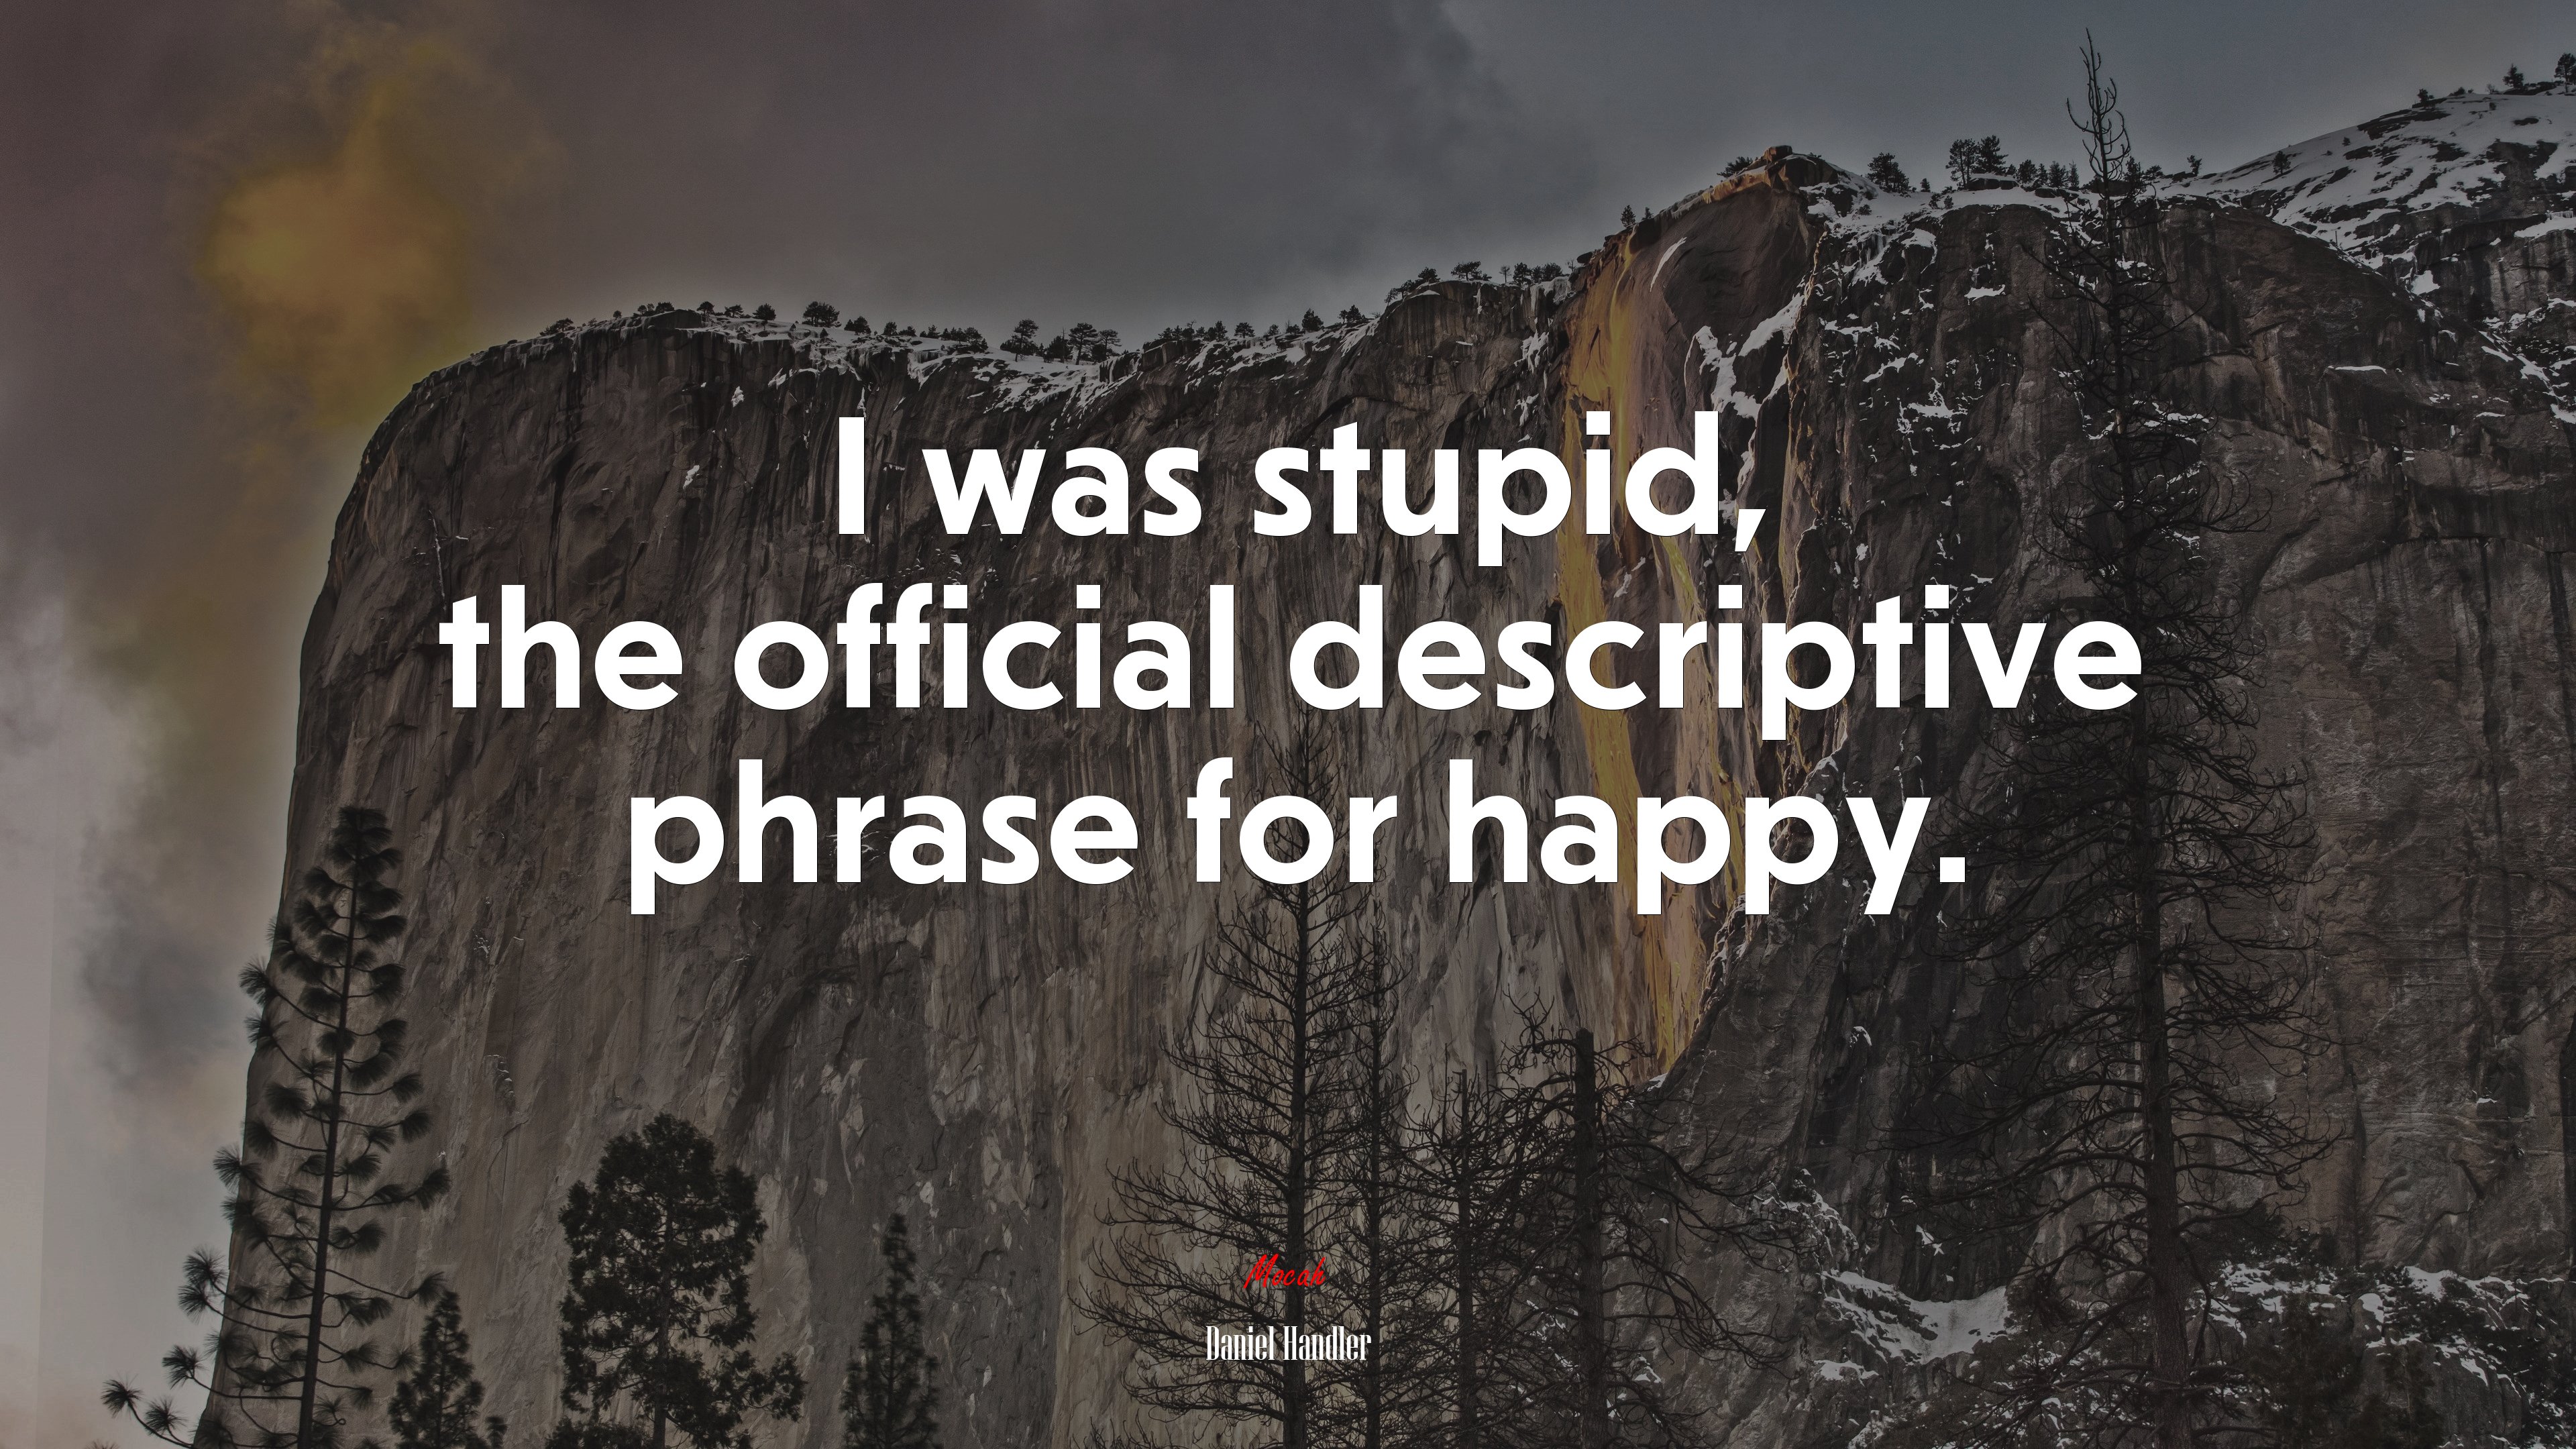 I was stupid the official descriptive phrase for happy daniel handler quote